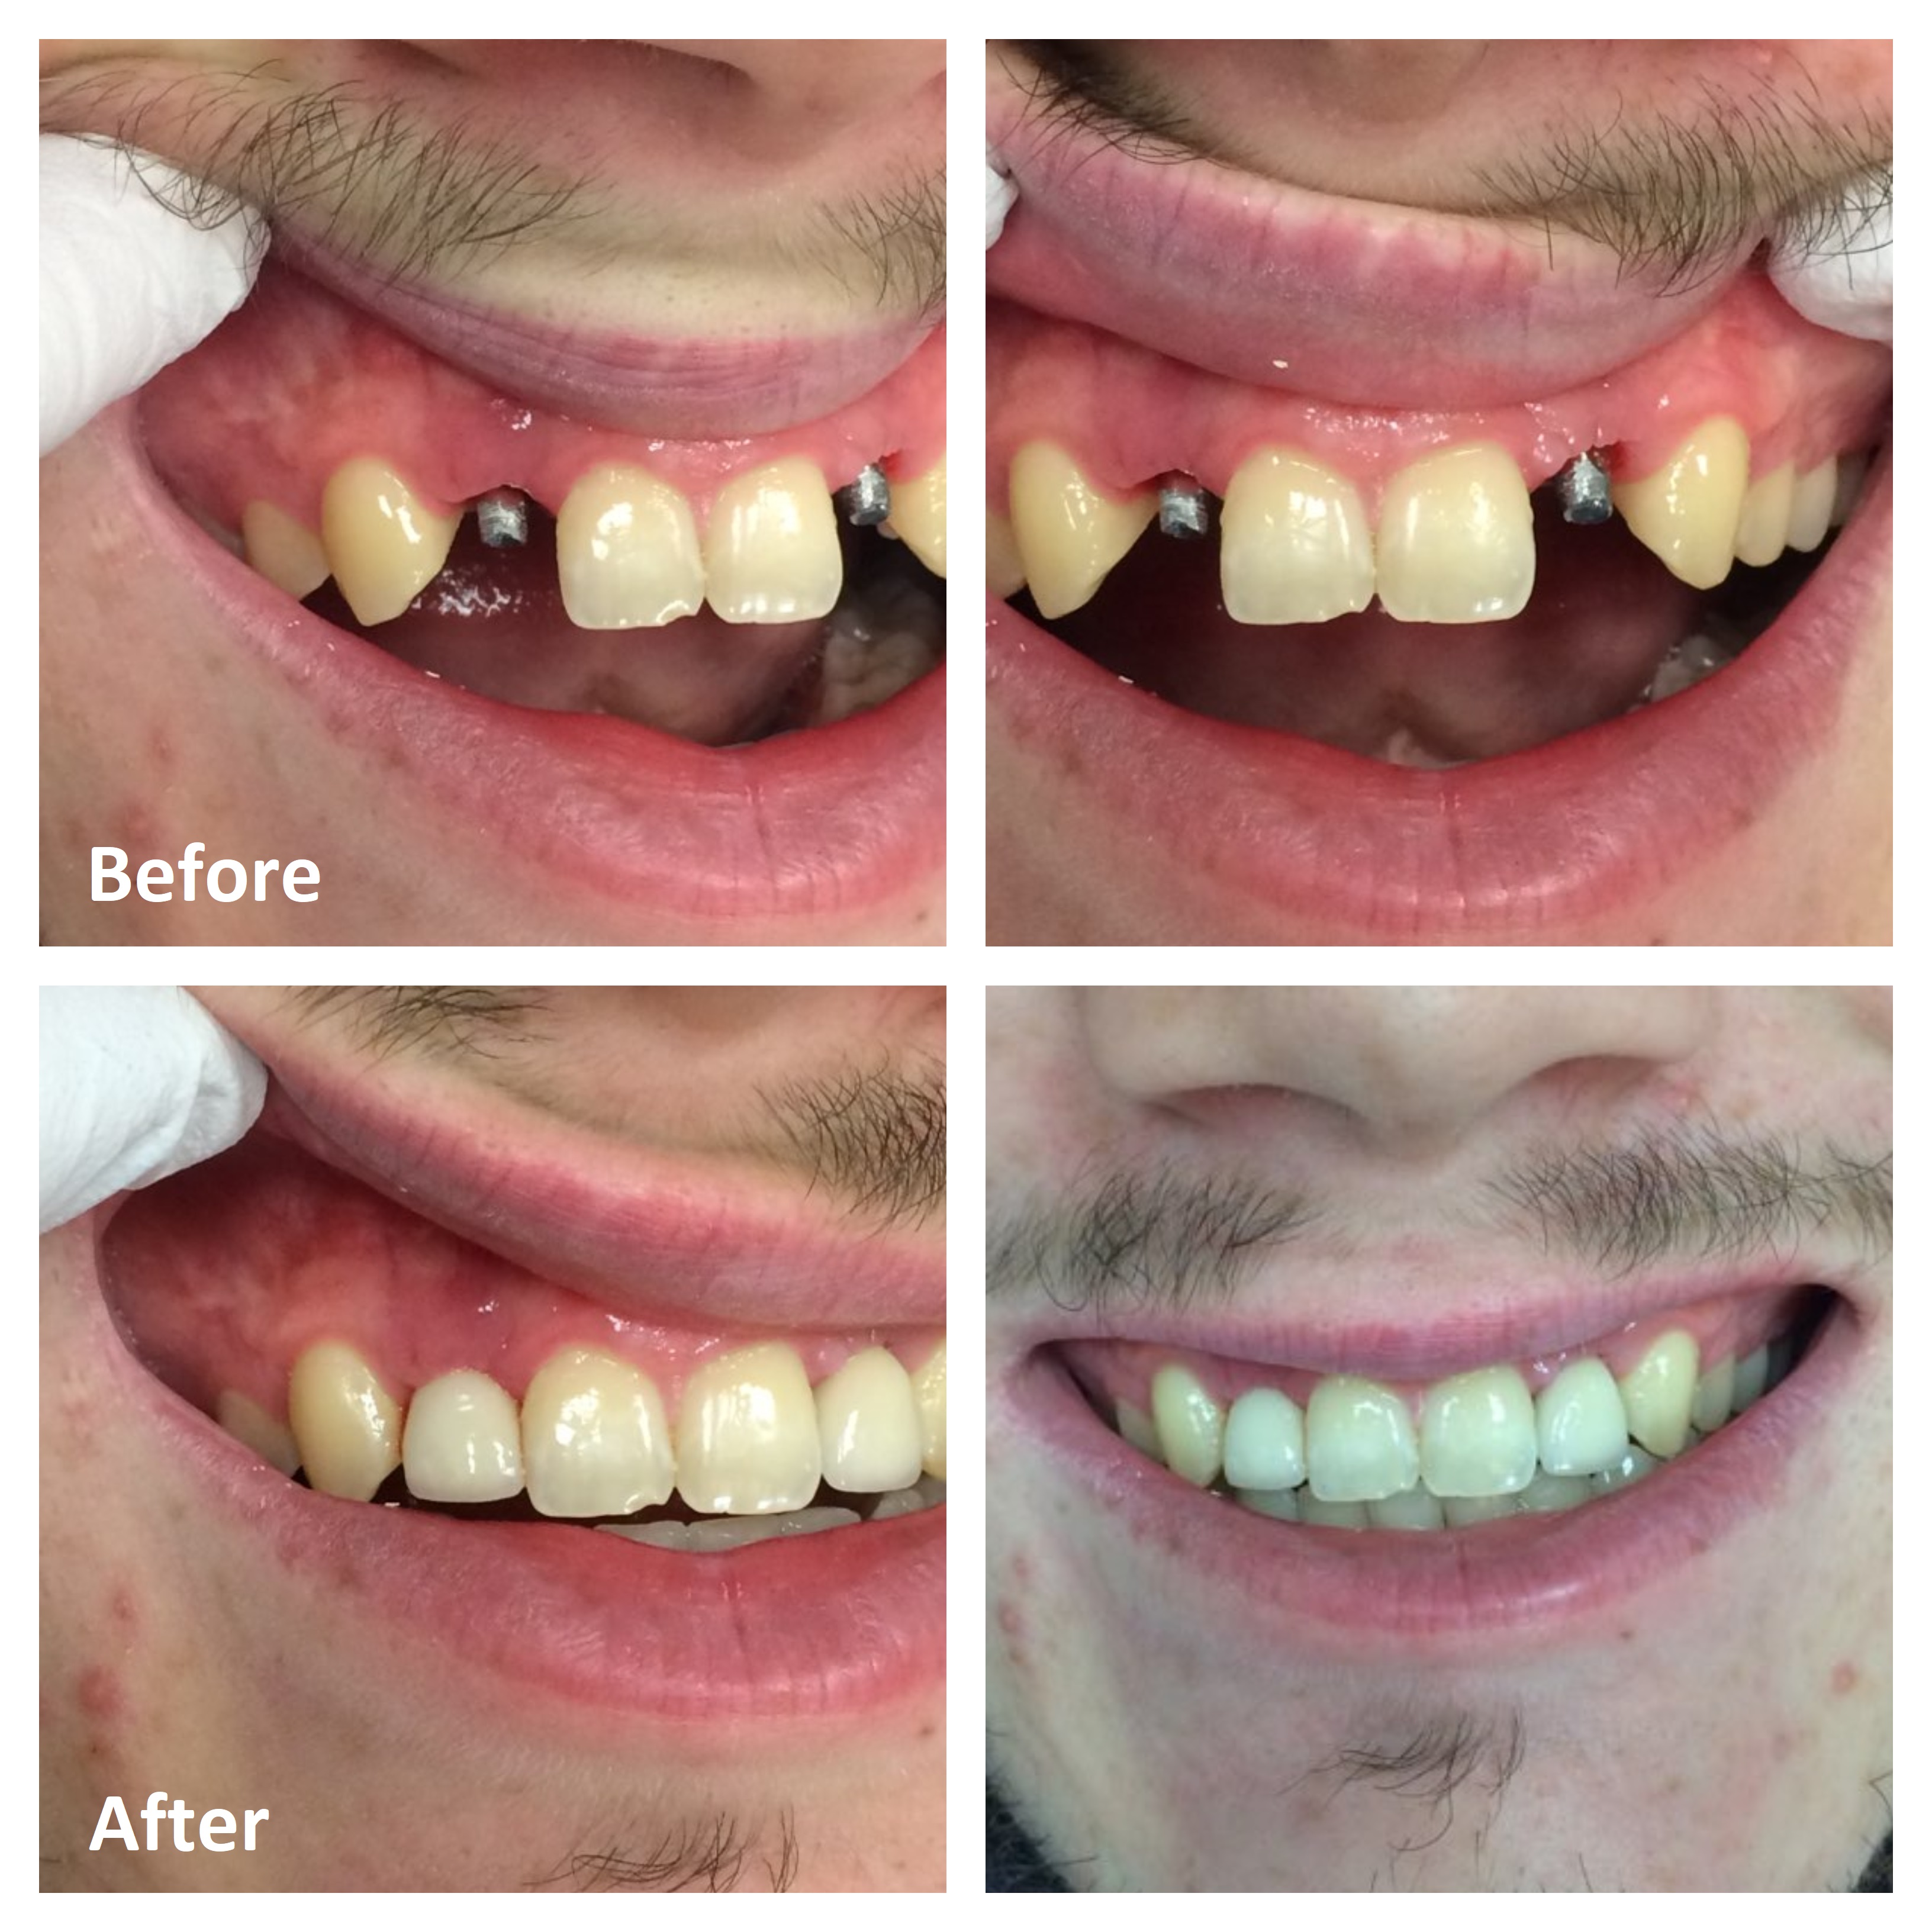 Single Tooth Implants Before and After | Dental Implants Ottawa